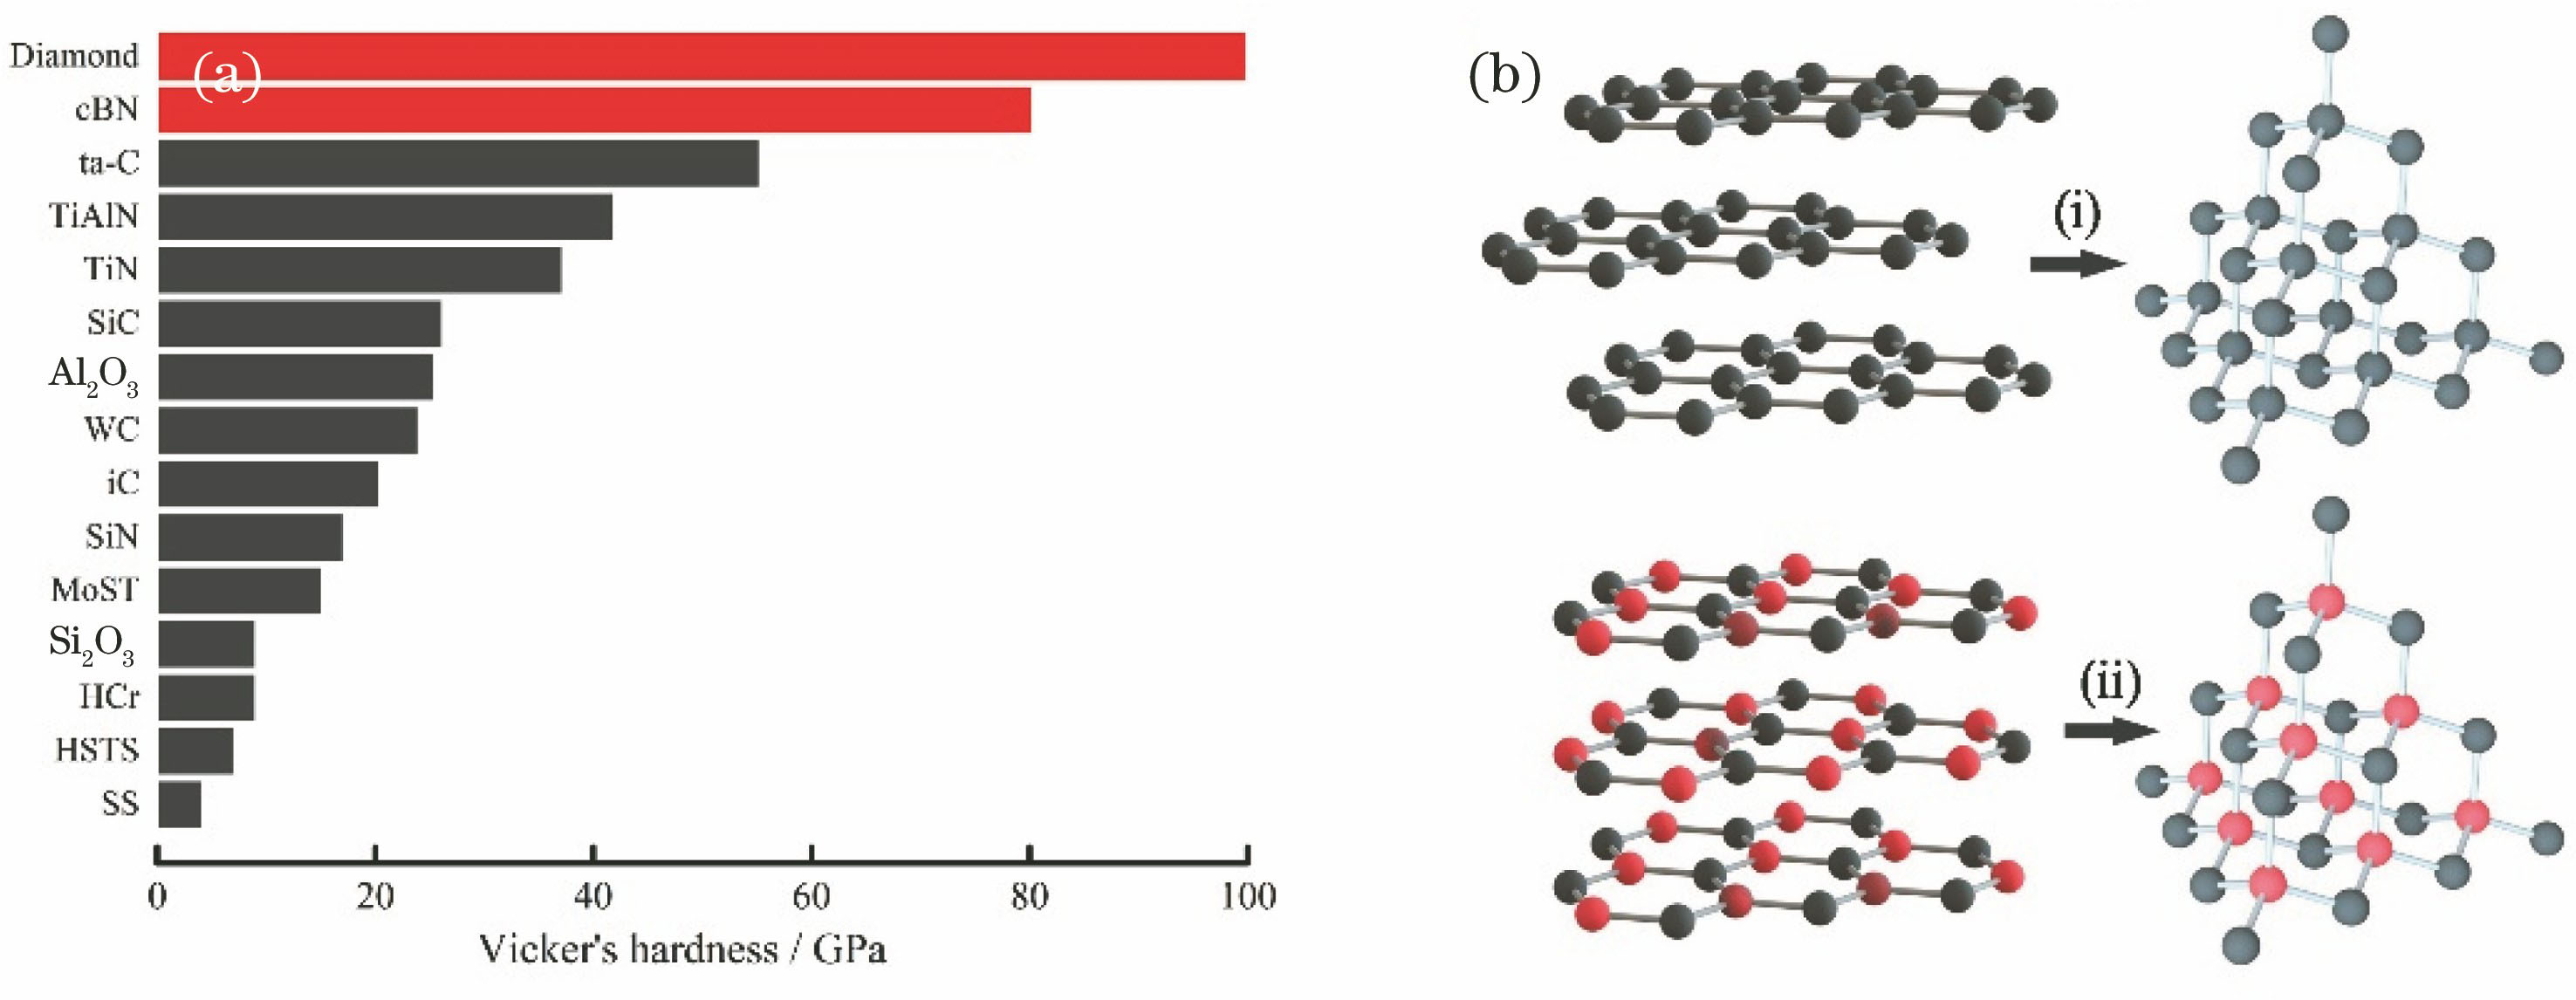 Hardness and atomic structures of two typical ultrahard materials. (a) Hardness of different materials; (b) cubic crystal structures of diamond and CBN